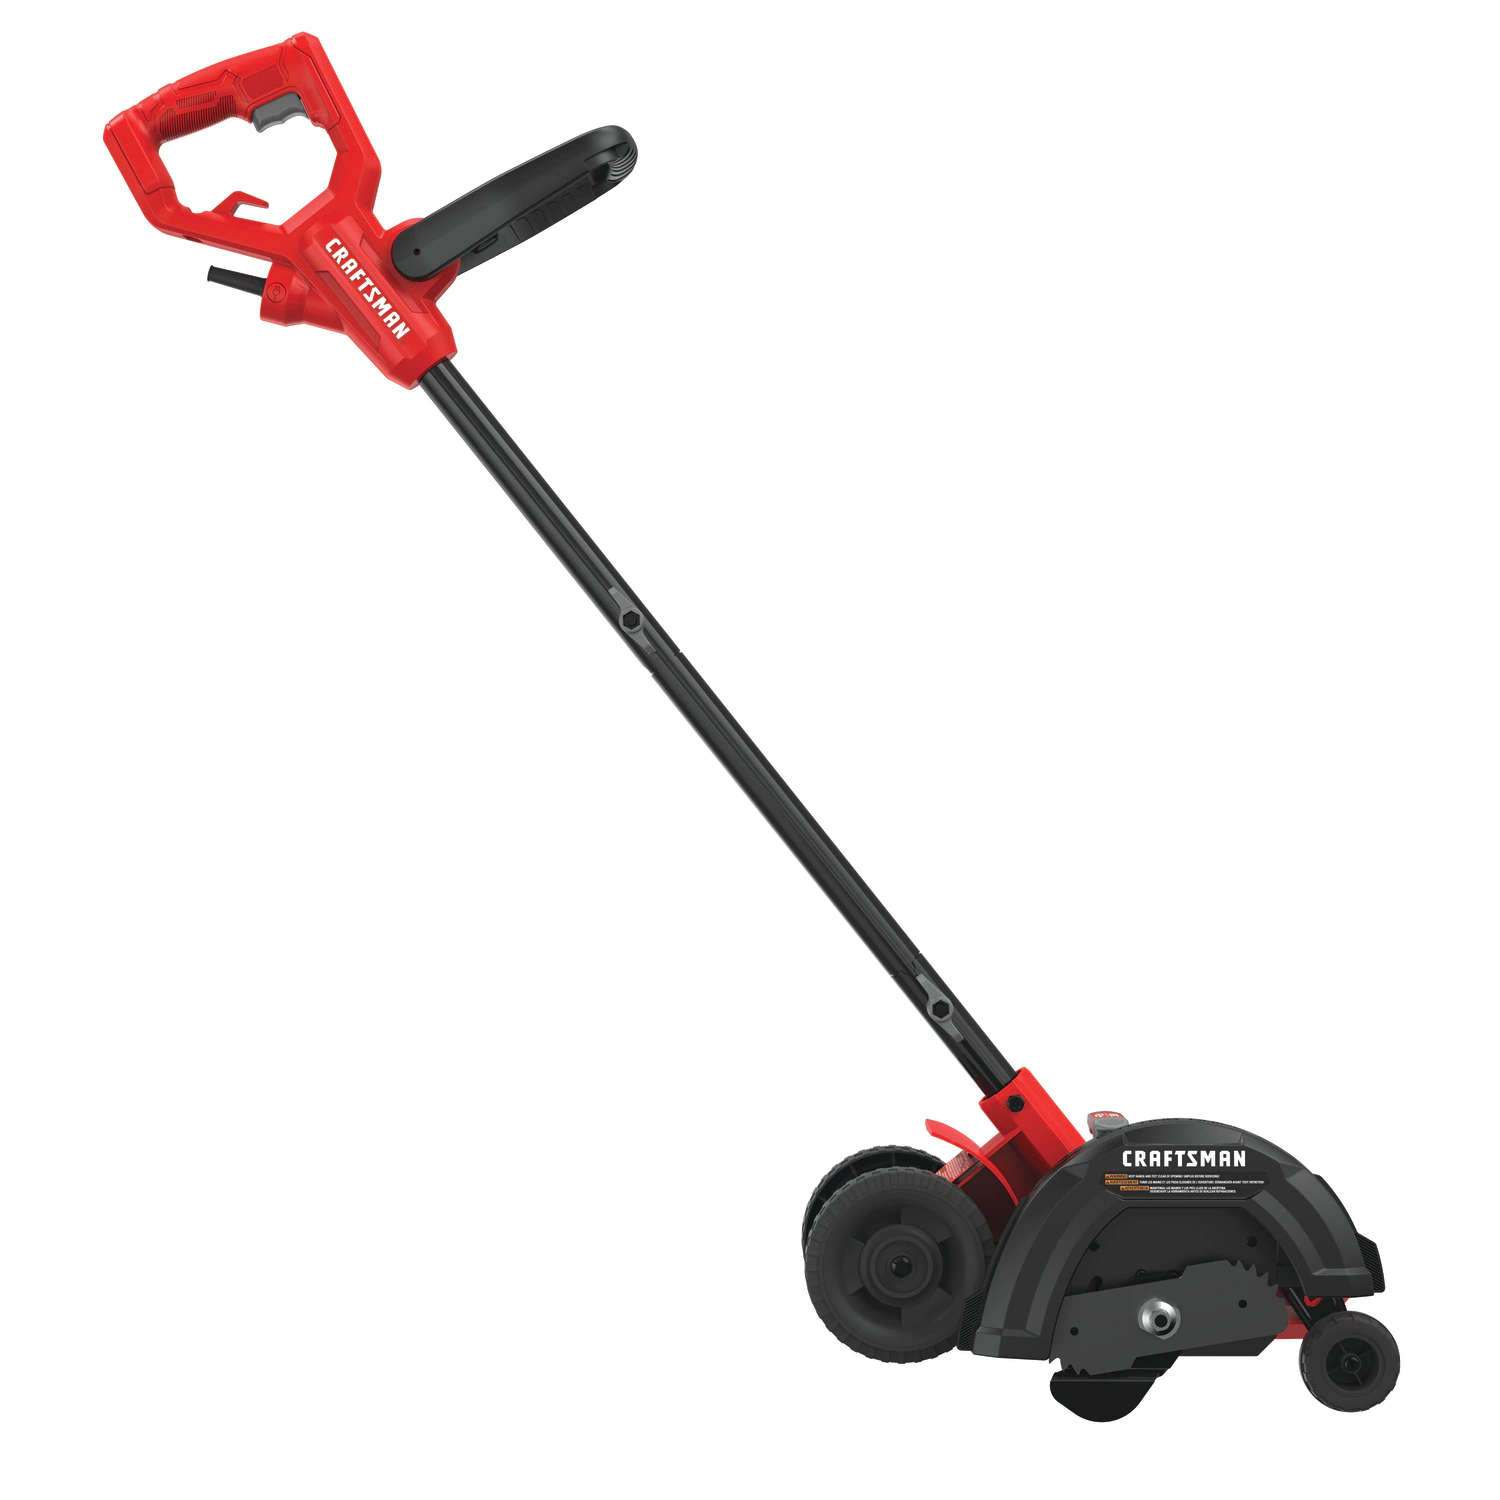 https://discounttoday.net/wp-content/uploads/2022/09/CRAFTSMAN-CMEED400-7.5-in-Push-Walk-Behind-Electric-Lawn-Edger7.webp